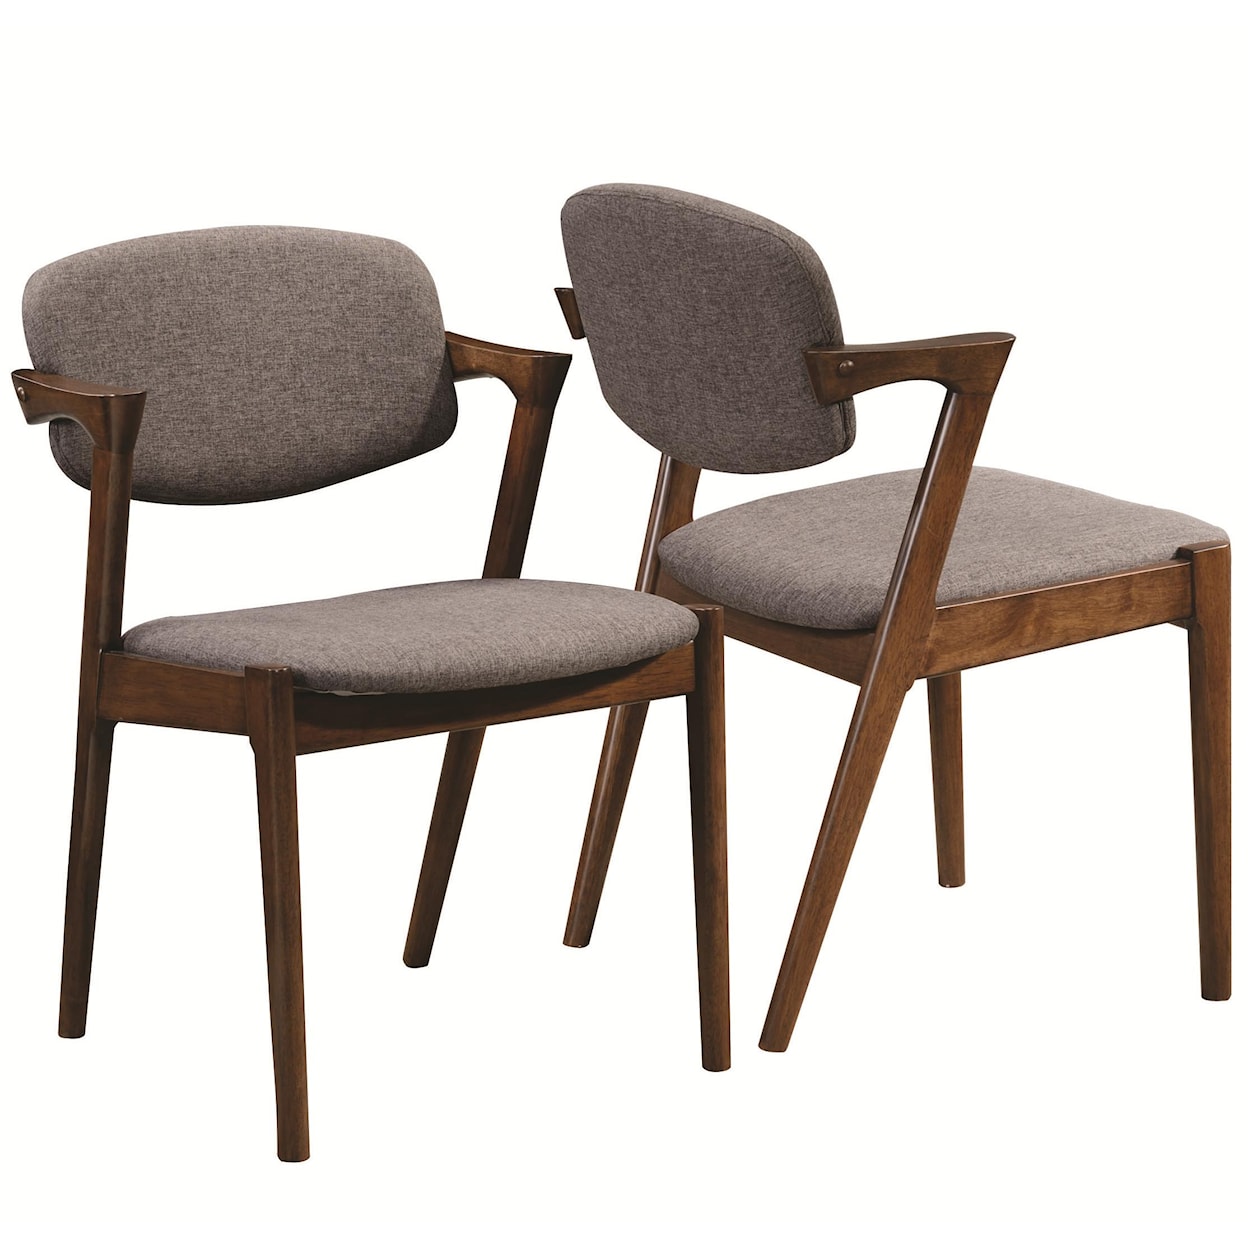 Coaster Malone Side Chair